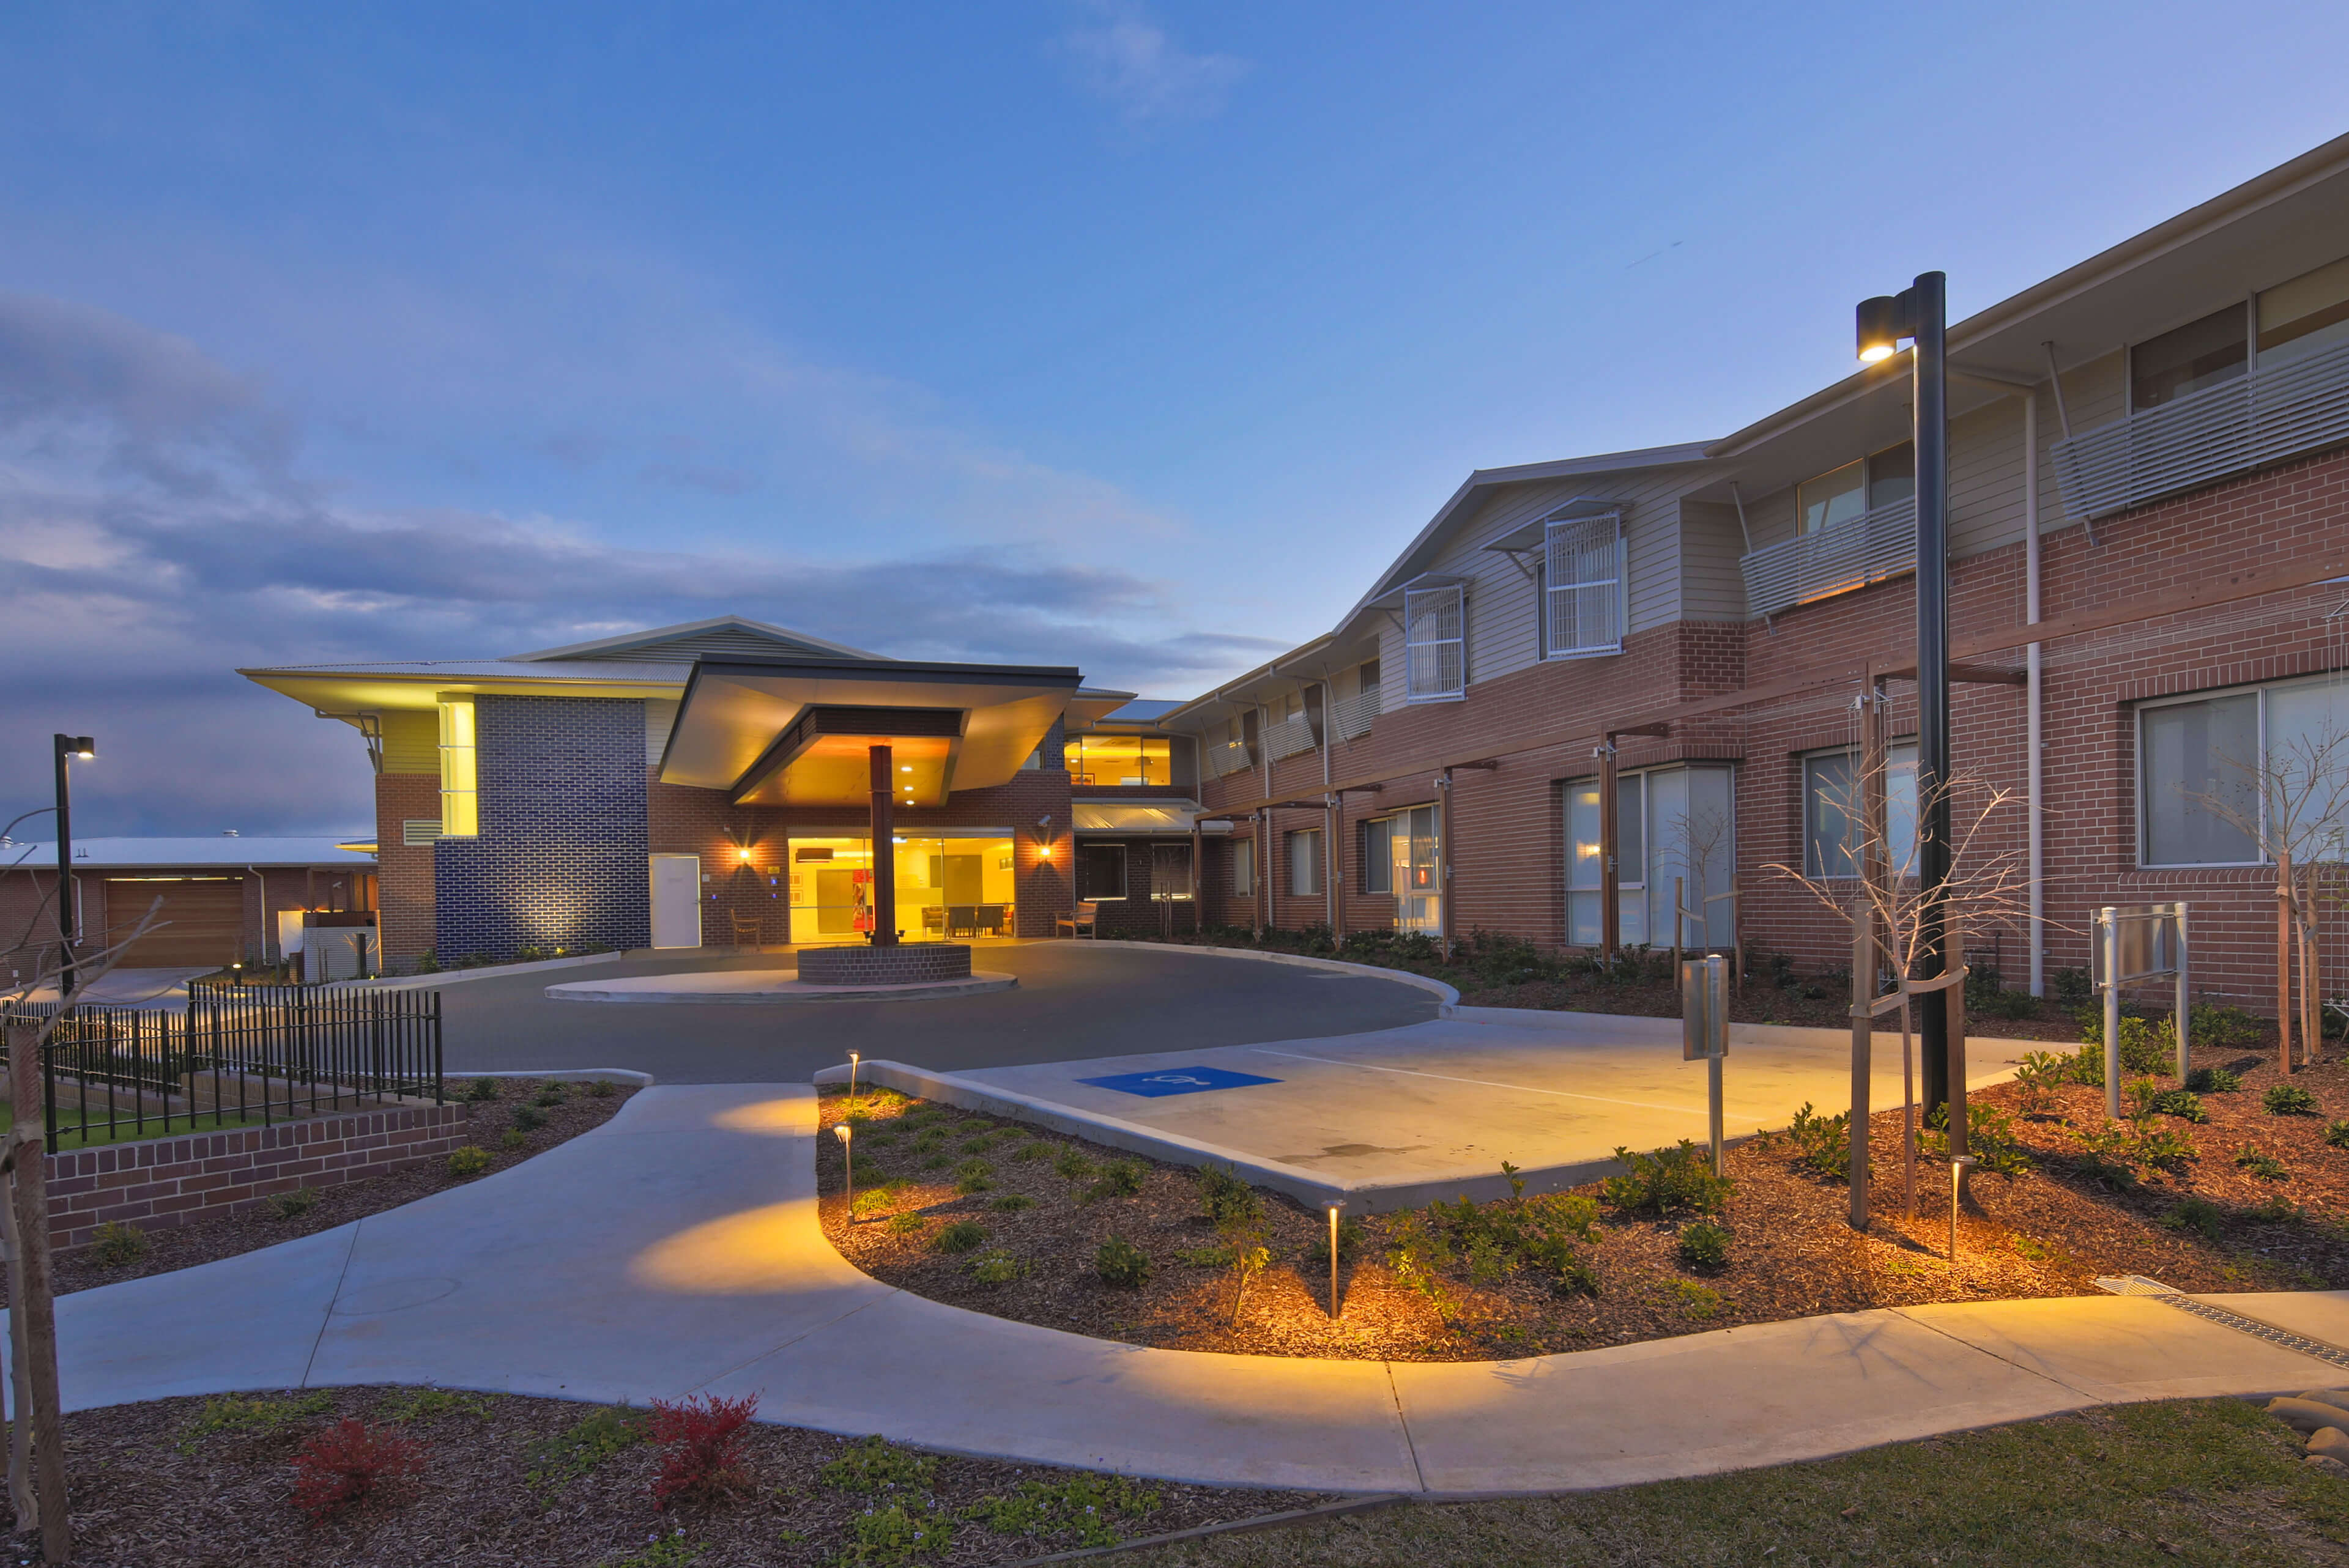 1 dusk exterior bupa bankstown taylor construction health and aged care